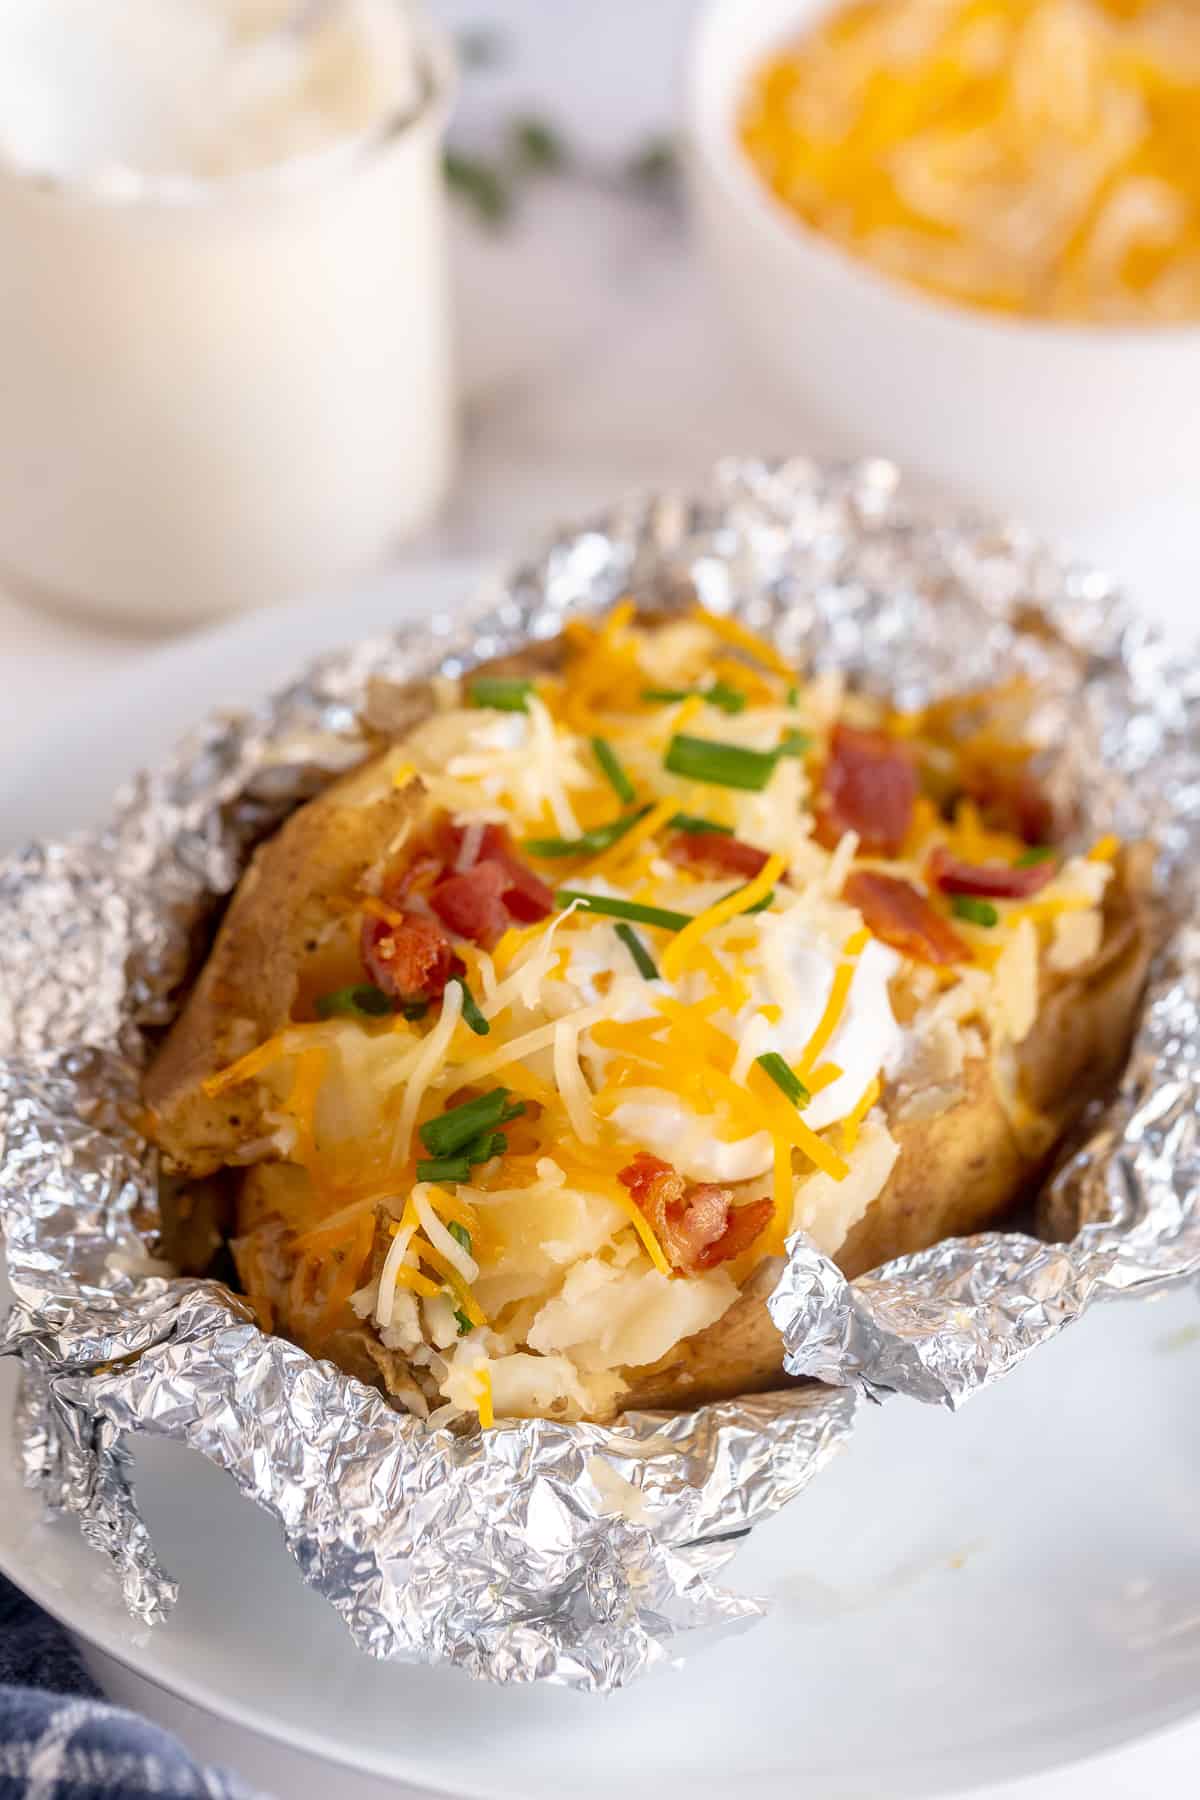 A Crock Pot Baked Potato topped with cheese, sour cream, and bacon on top of foil.